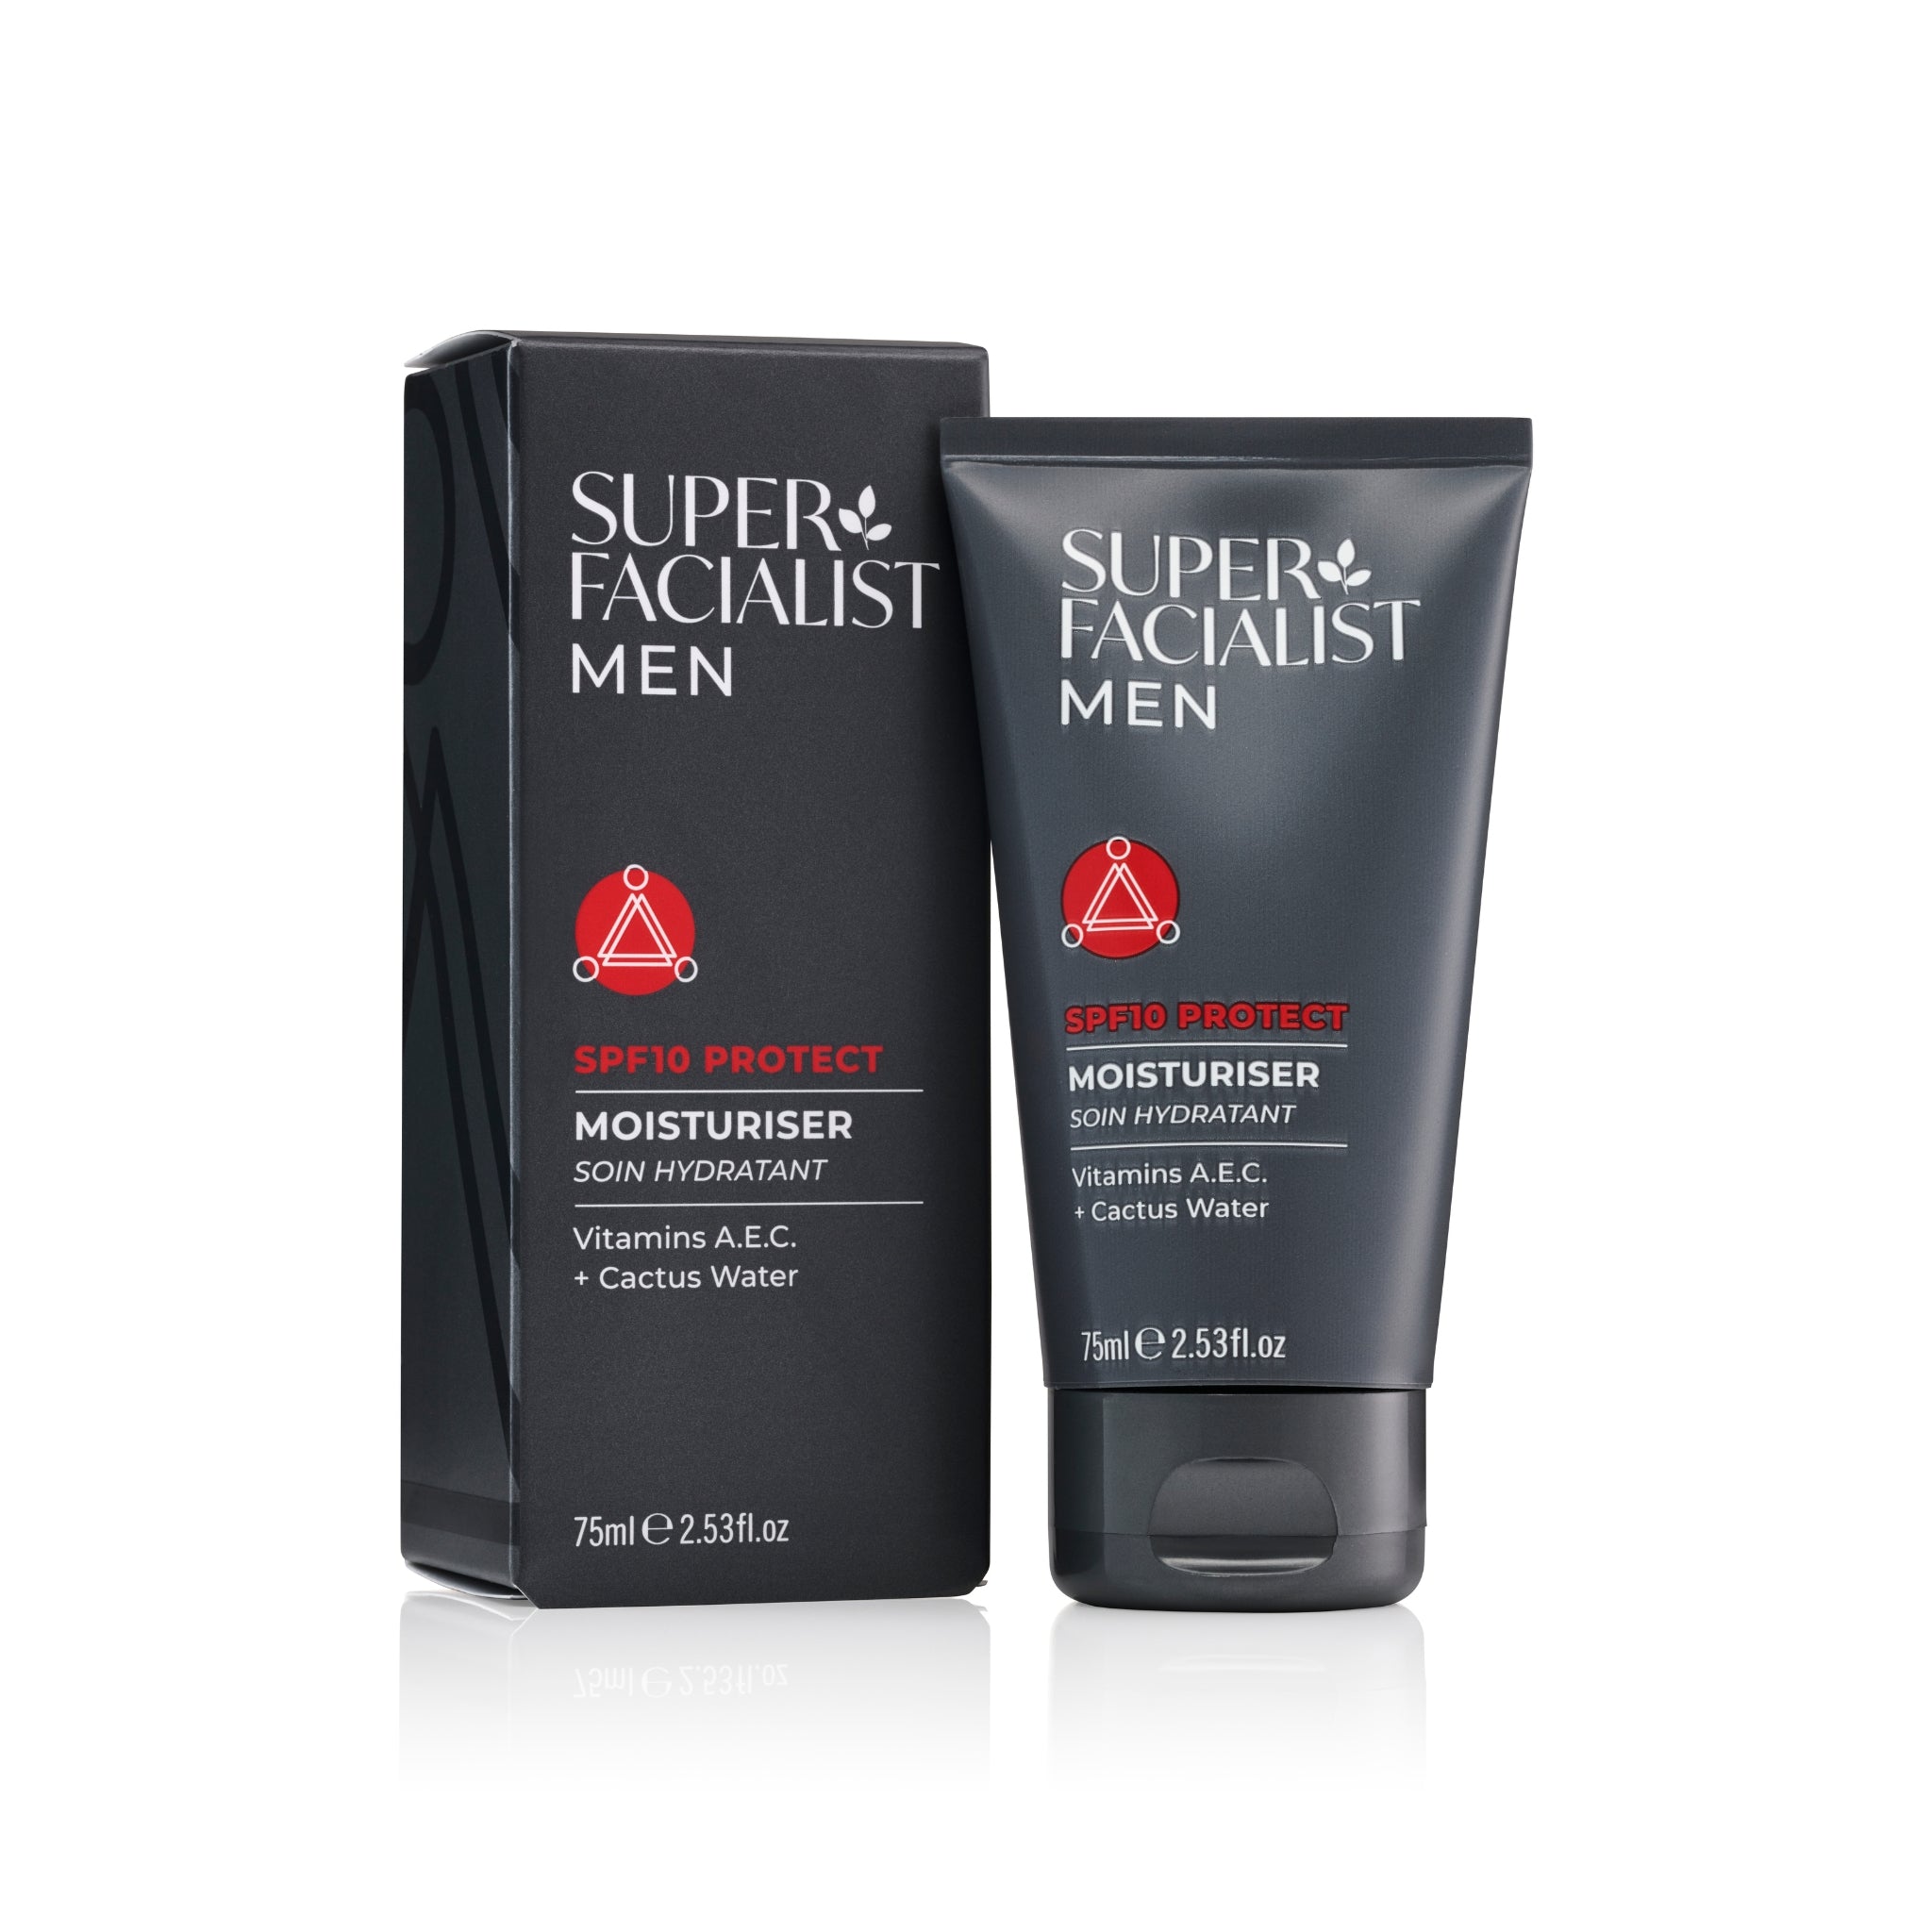 Protect Moisturiser for Men SPF10 grey tube with red symbol and red writing next to carton box